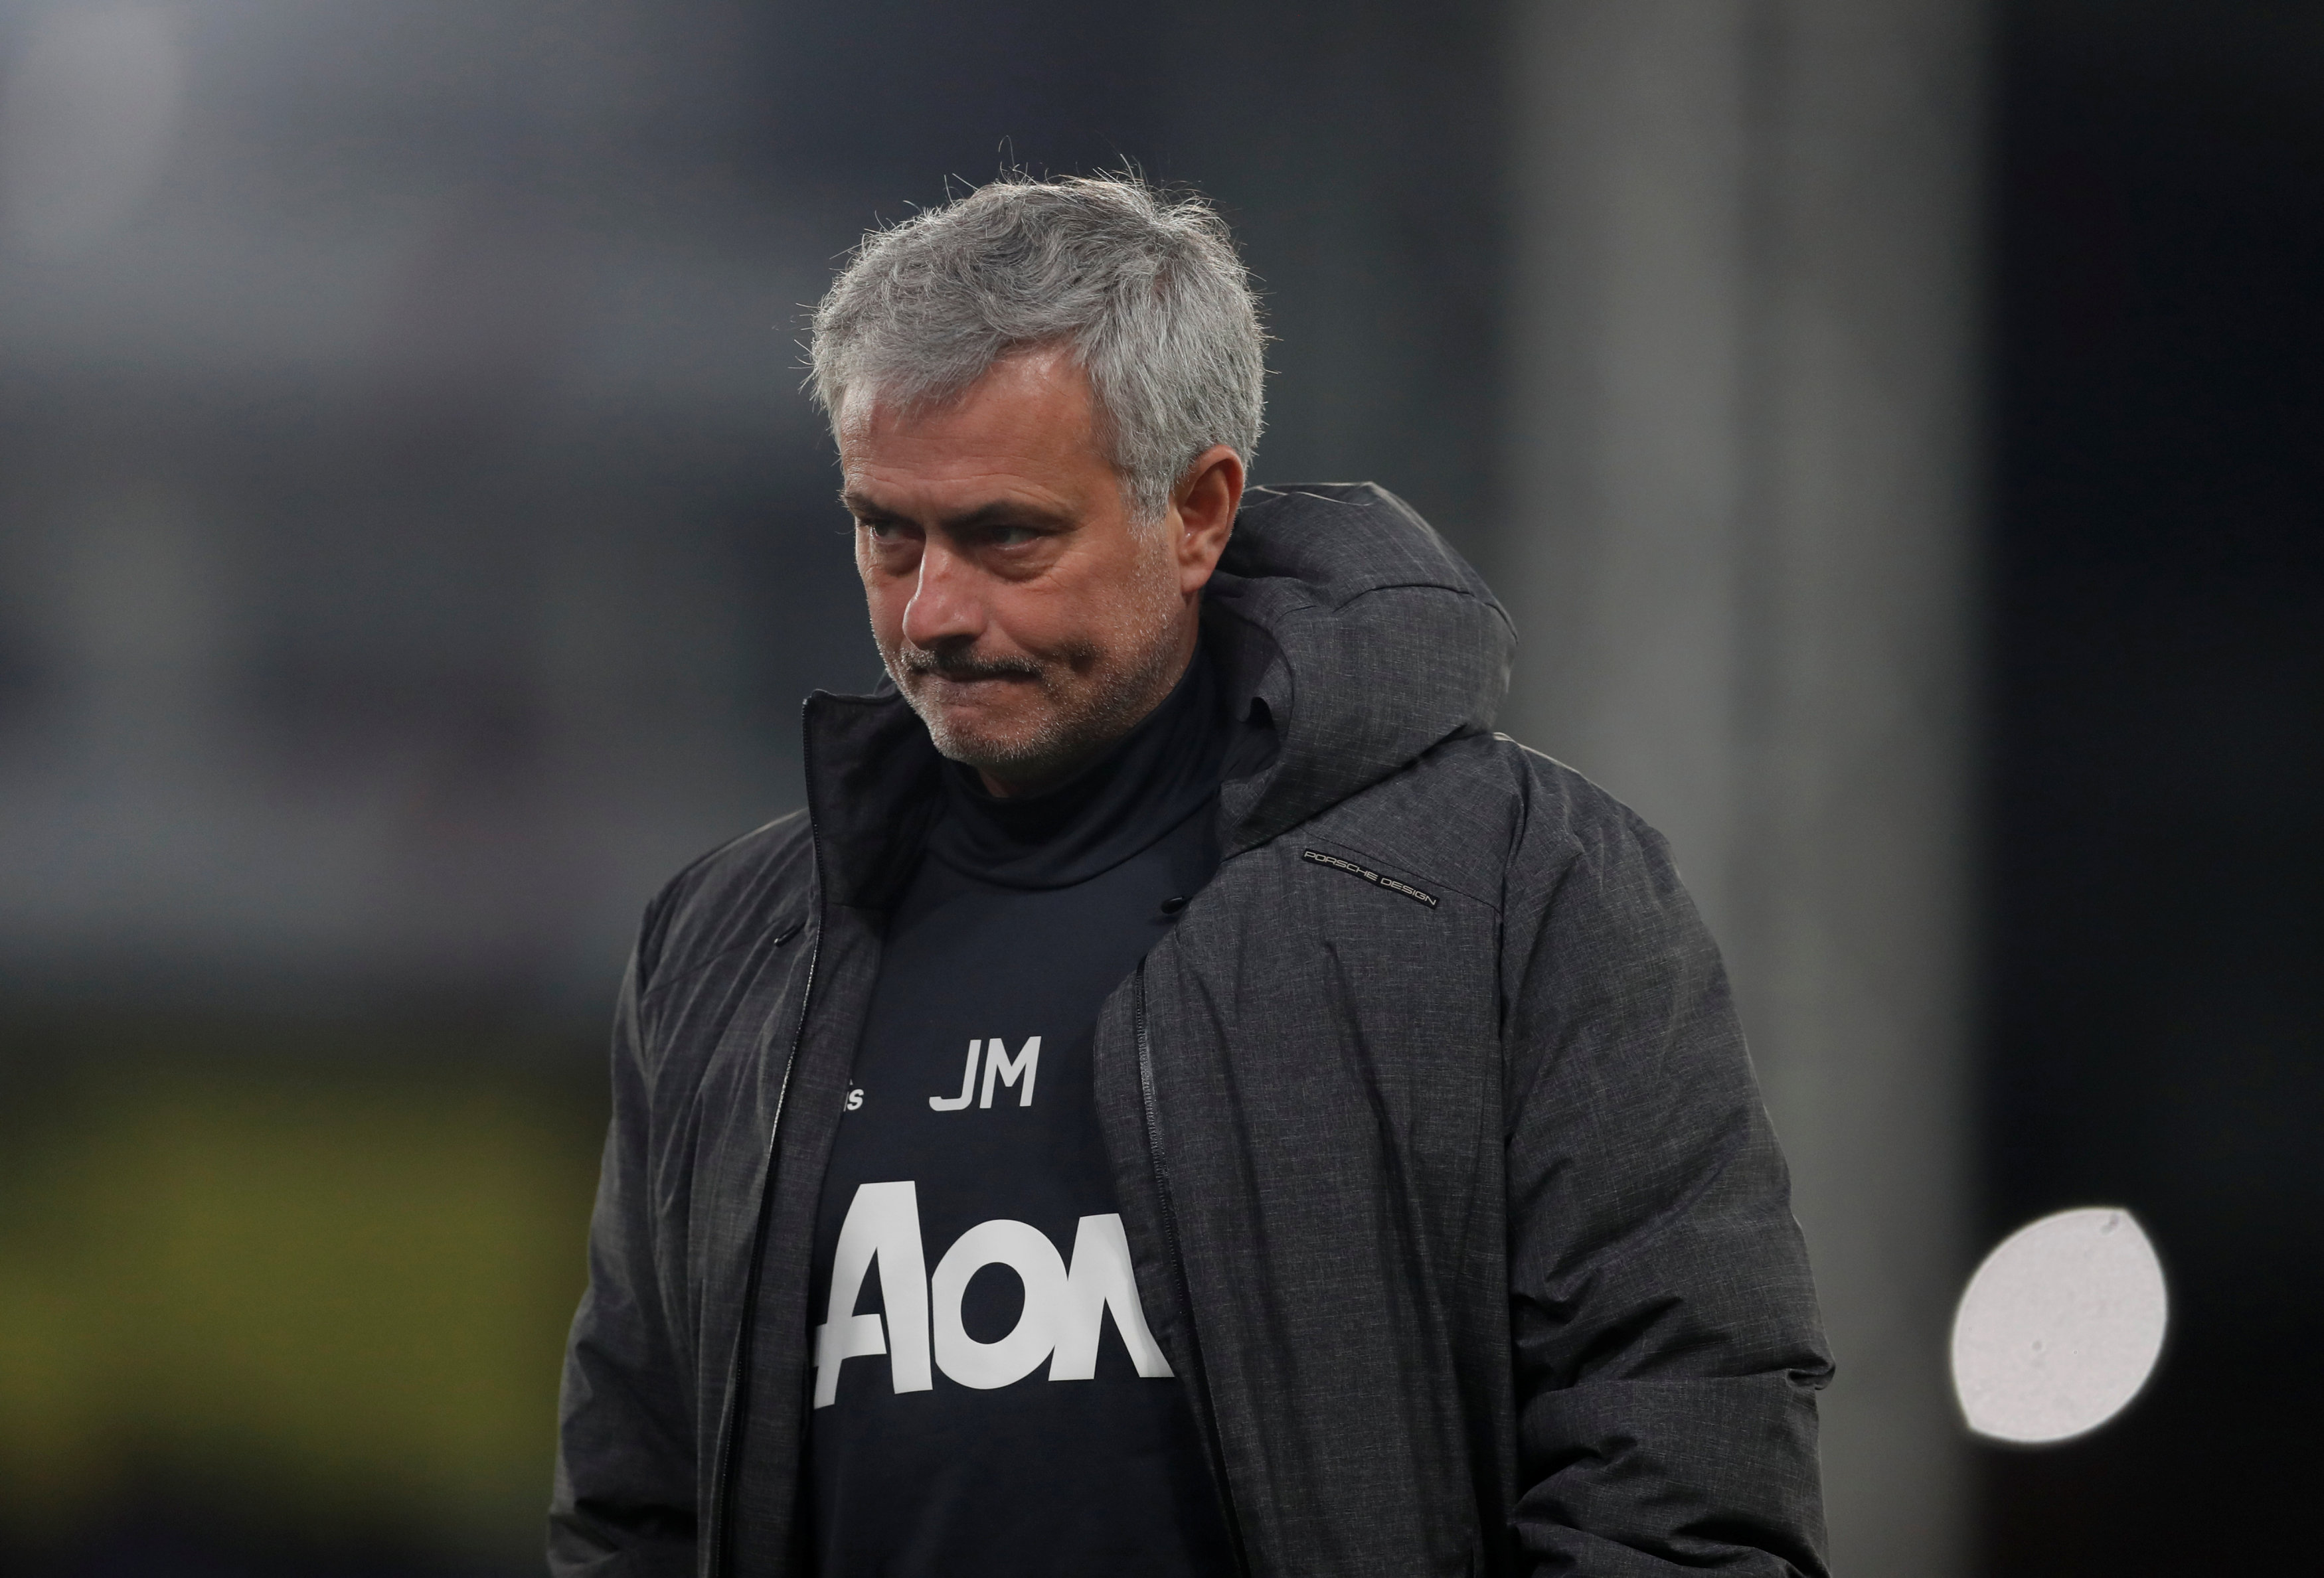 Football: Man United not getting best out of Alexis Sanchez, says Jose Mourinho